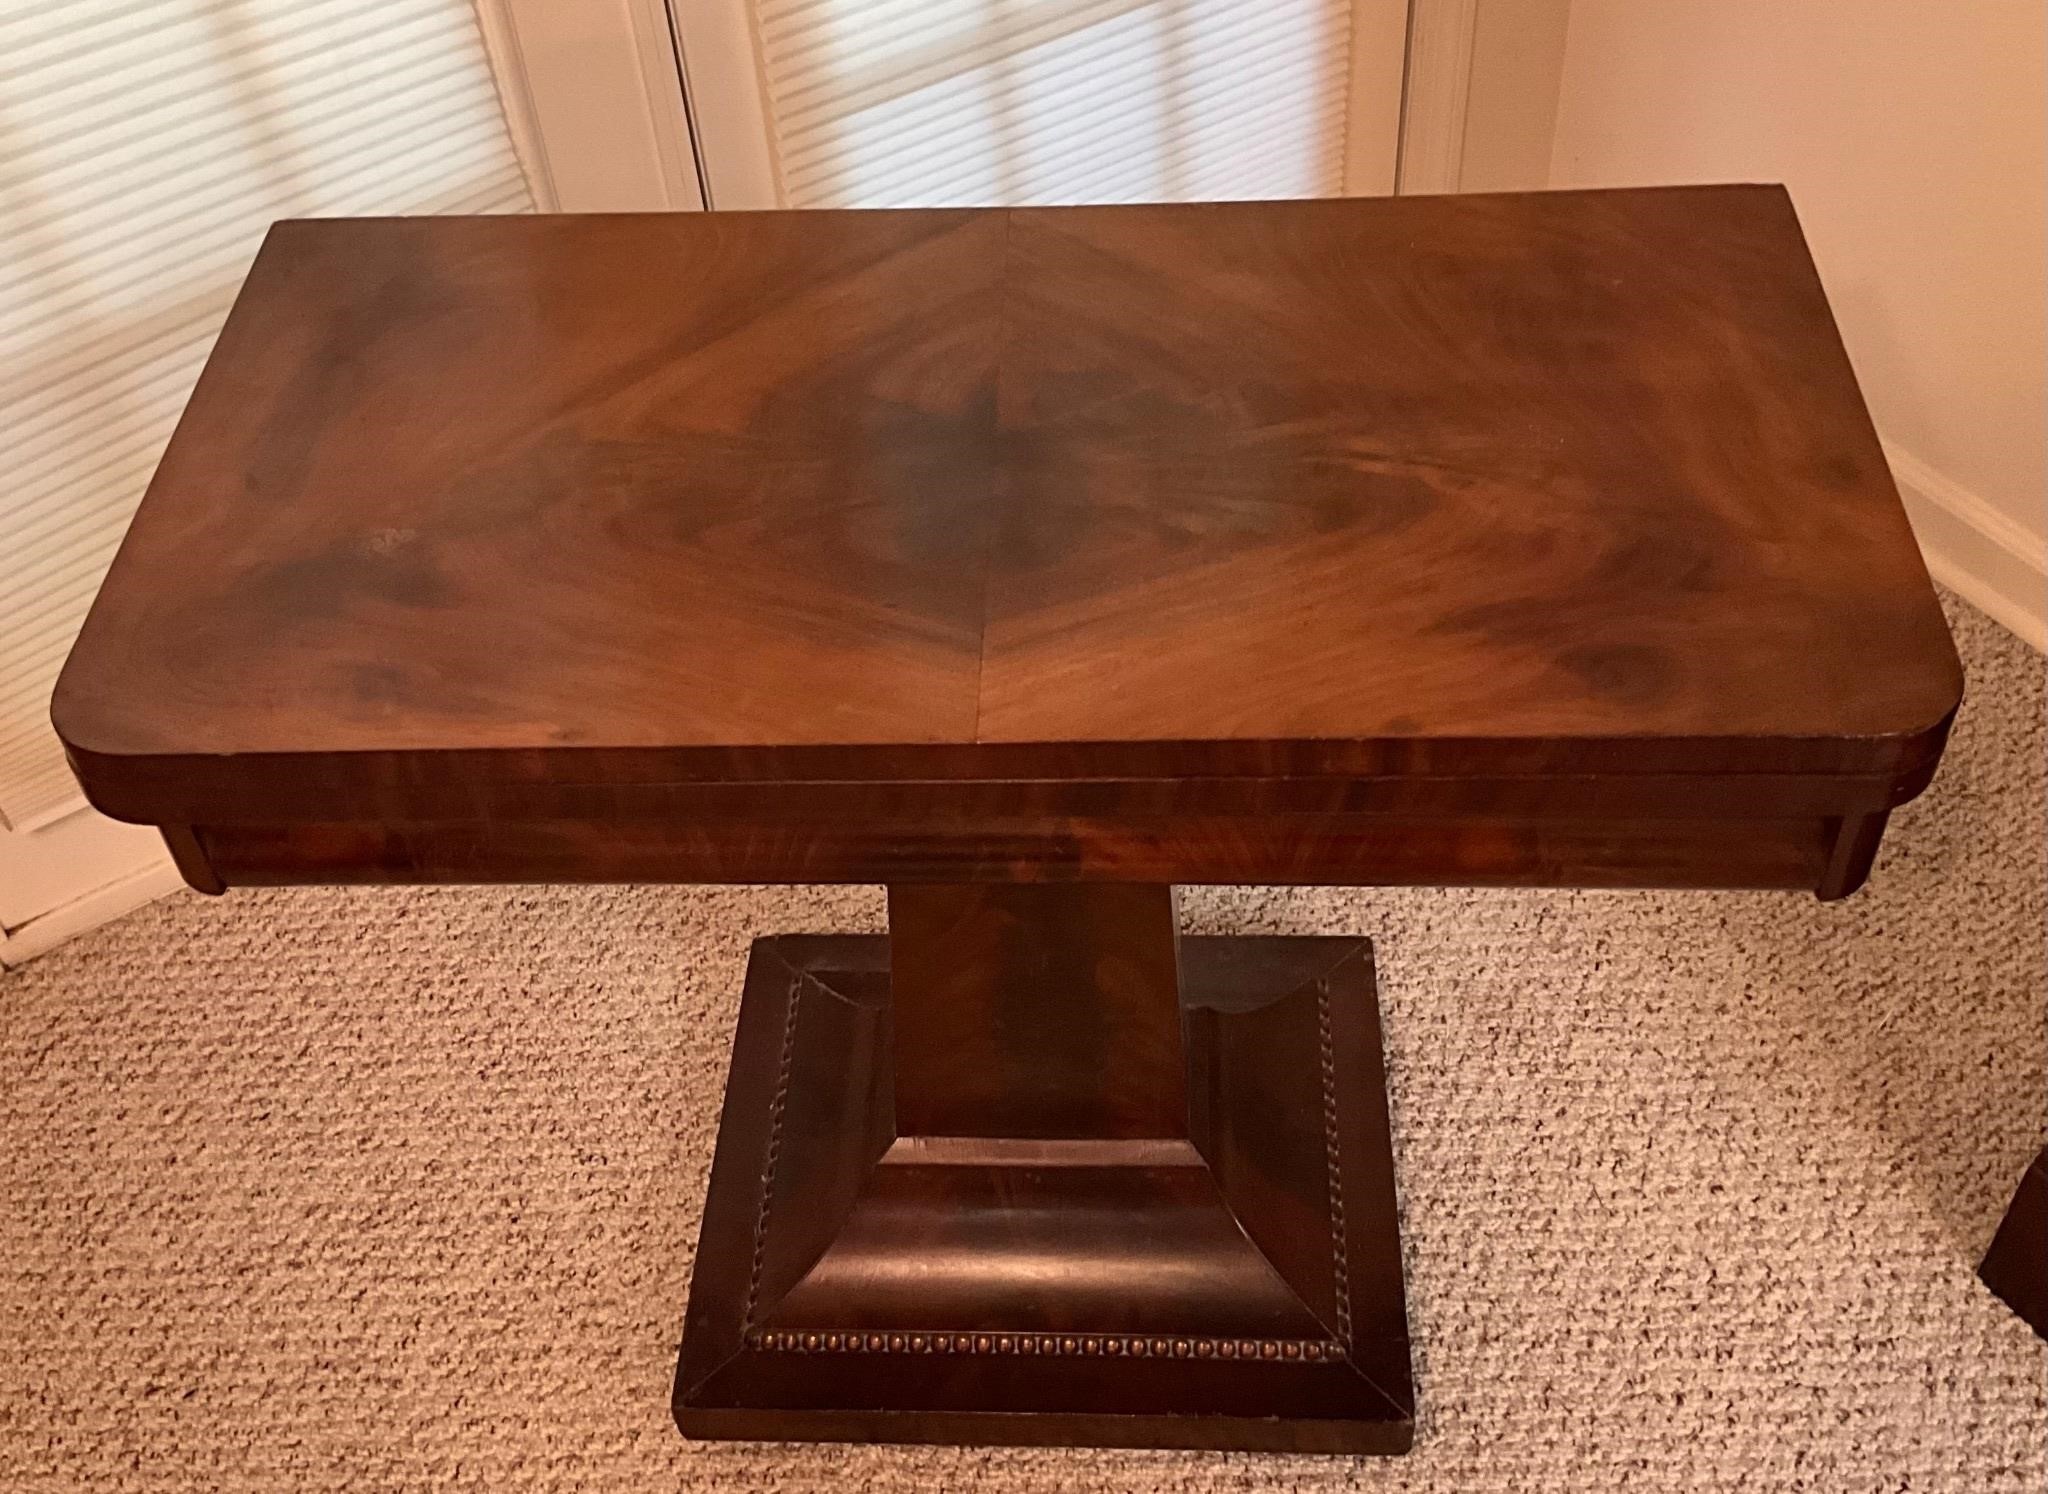 Antique Swivel Top Table See Comments